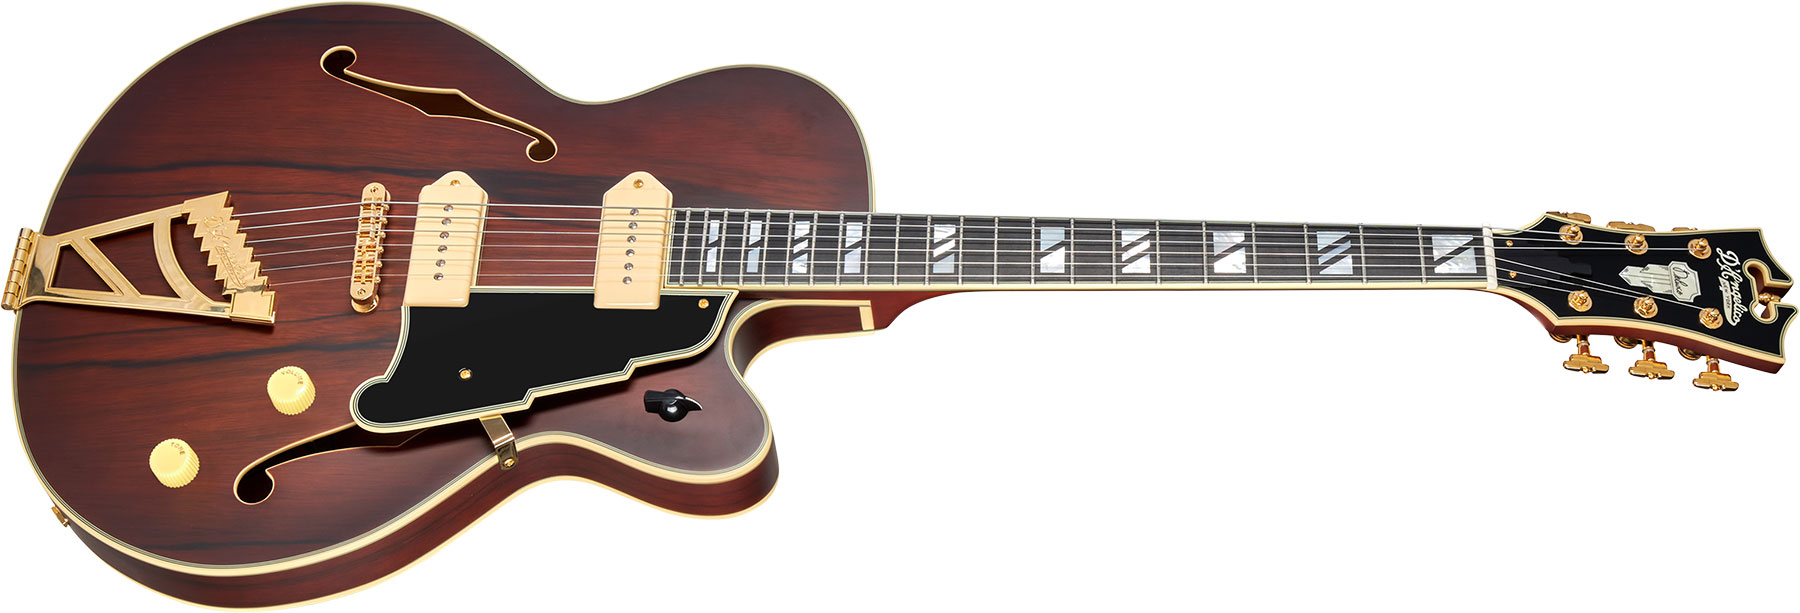 D'angelico 59 Deluxe 2s P90 Ht Eb - Satin Brown Burst - Hollow-body electric guitar - Variation 1